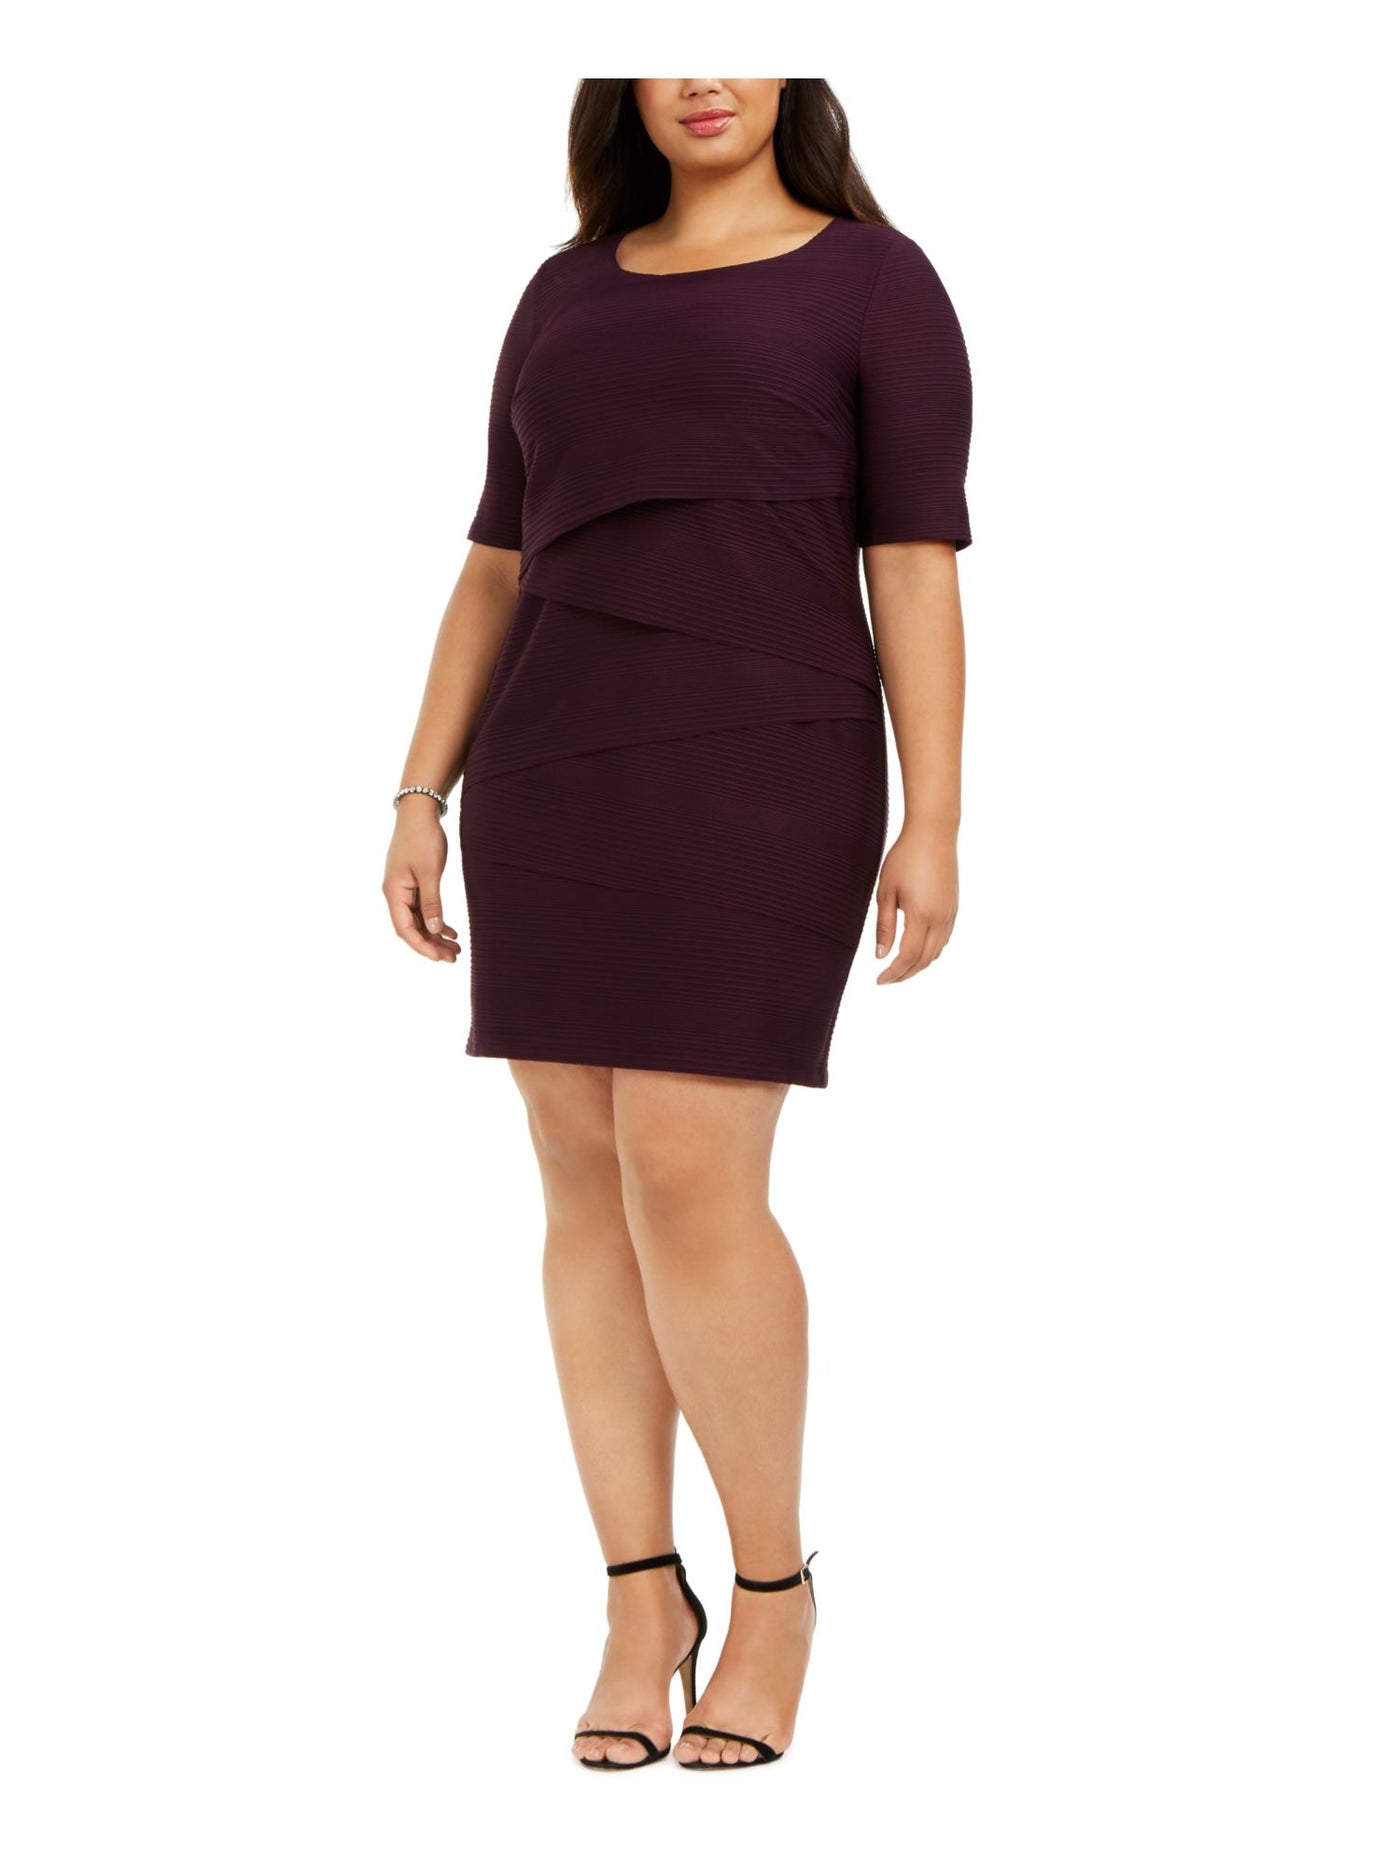 CONNECTED APPAREL Womens Burgundy Ribbed Short Sleeve Jewel Neck Above The Knee Sheath Dress Plus 20W